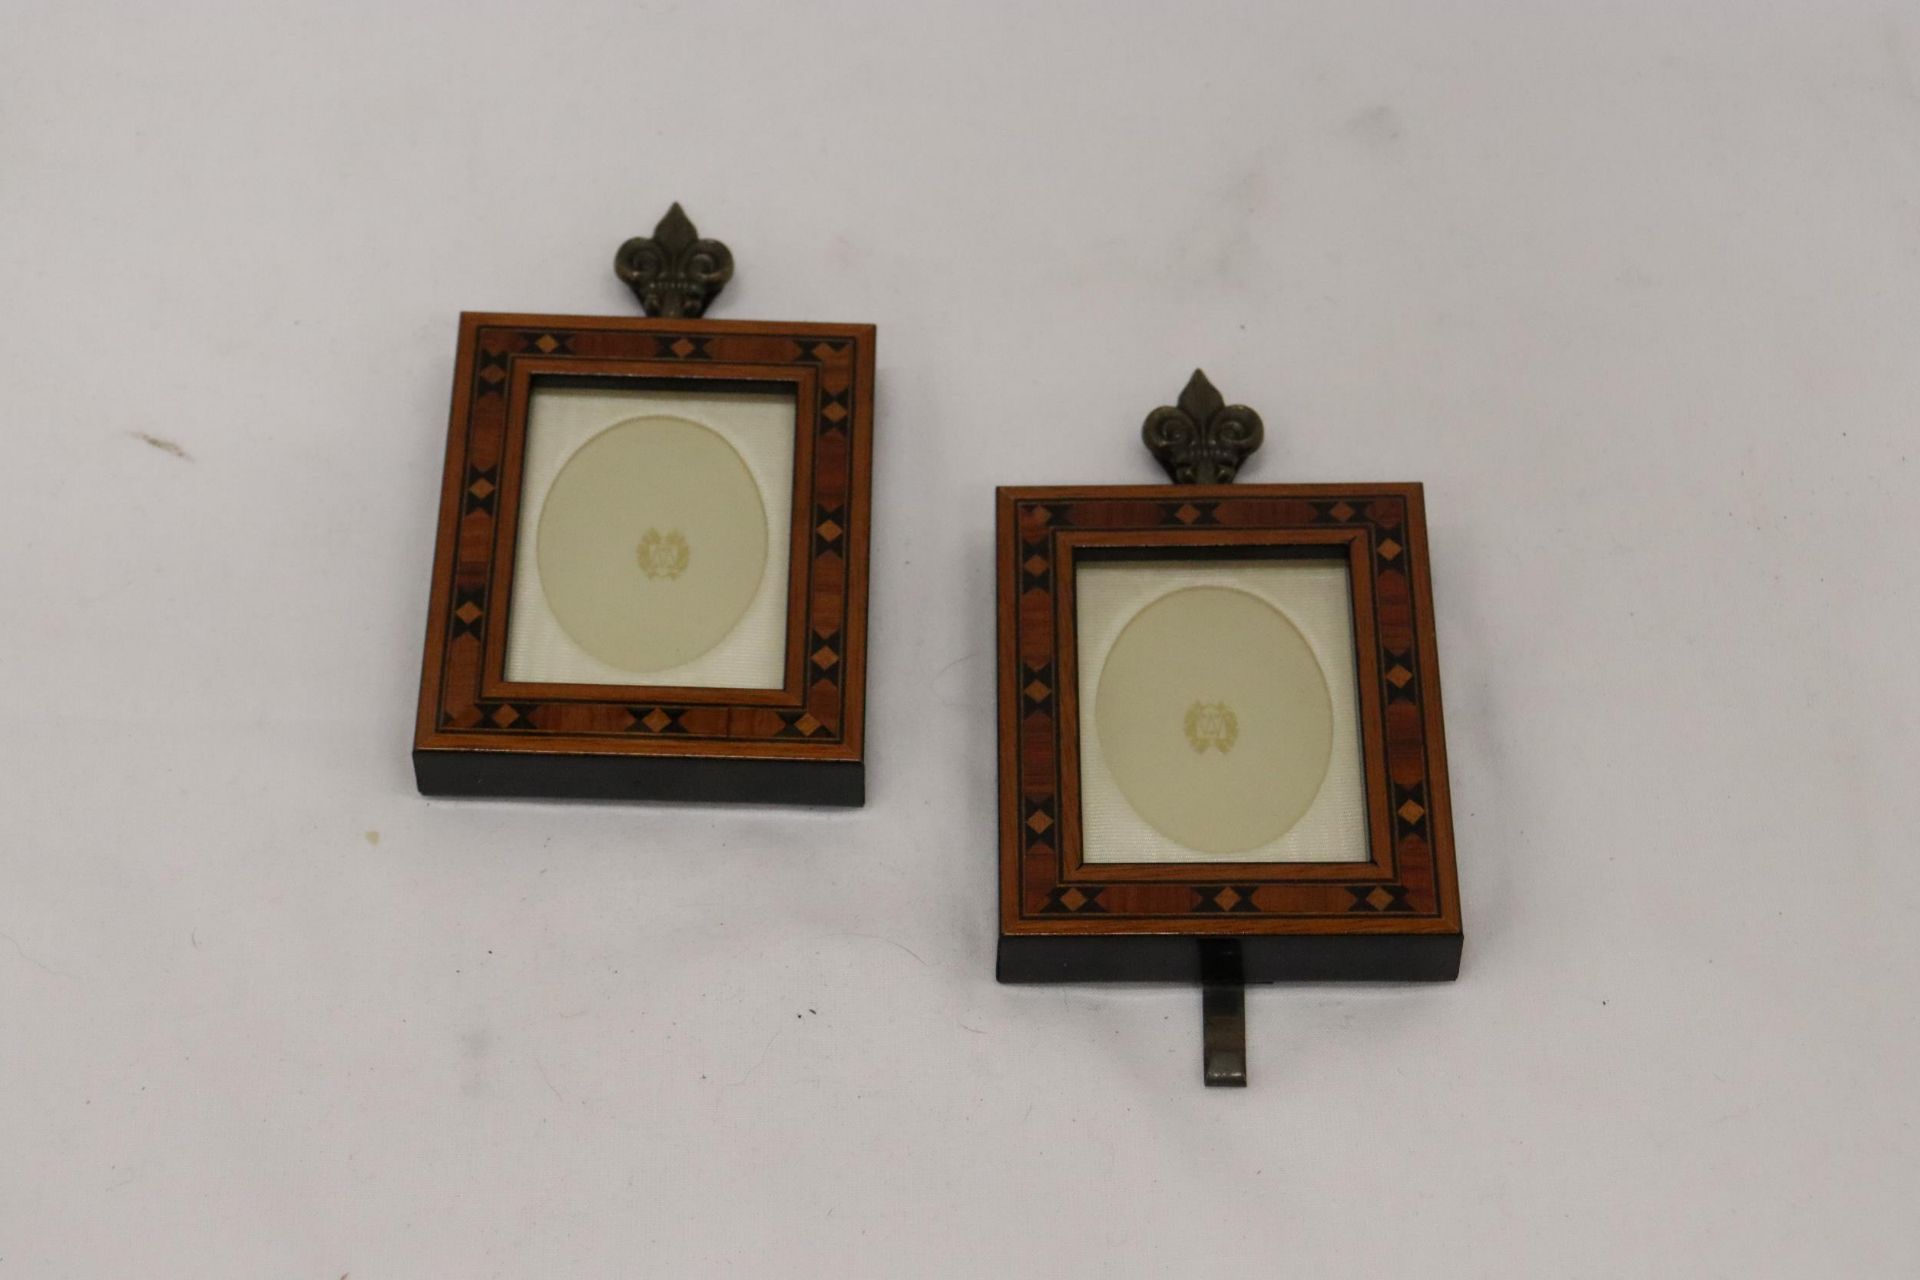 A PAIR OF SMALL INLAID WOODEN PHOTO FRAMES, 7CM X 8CM